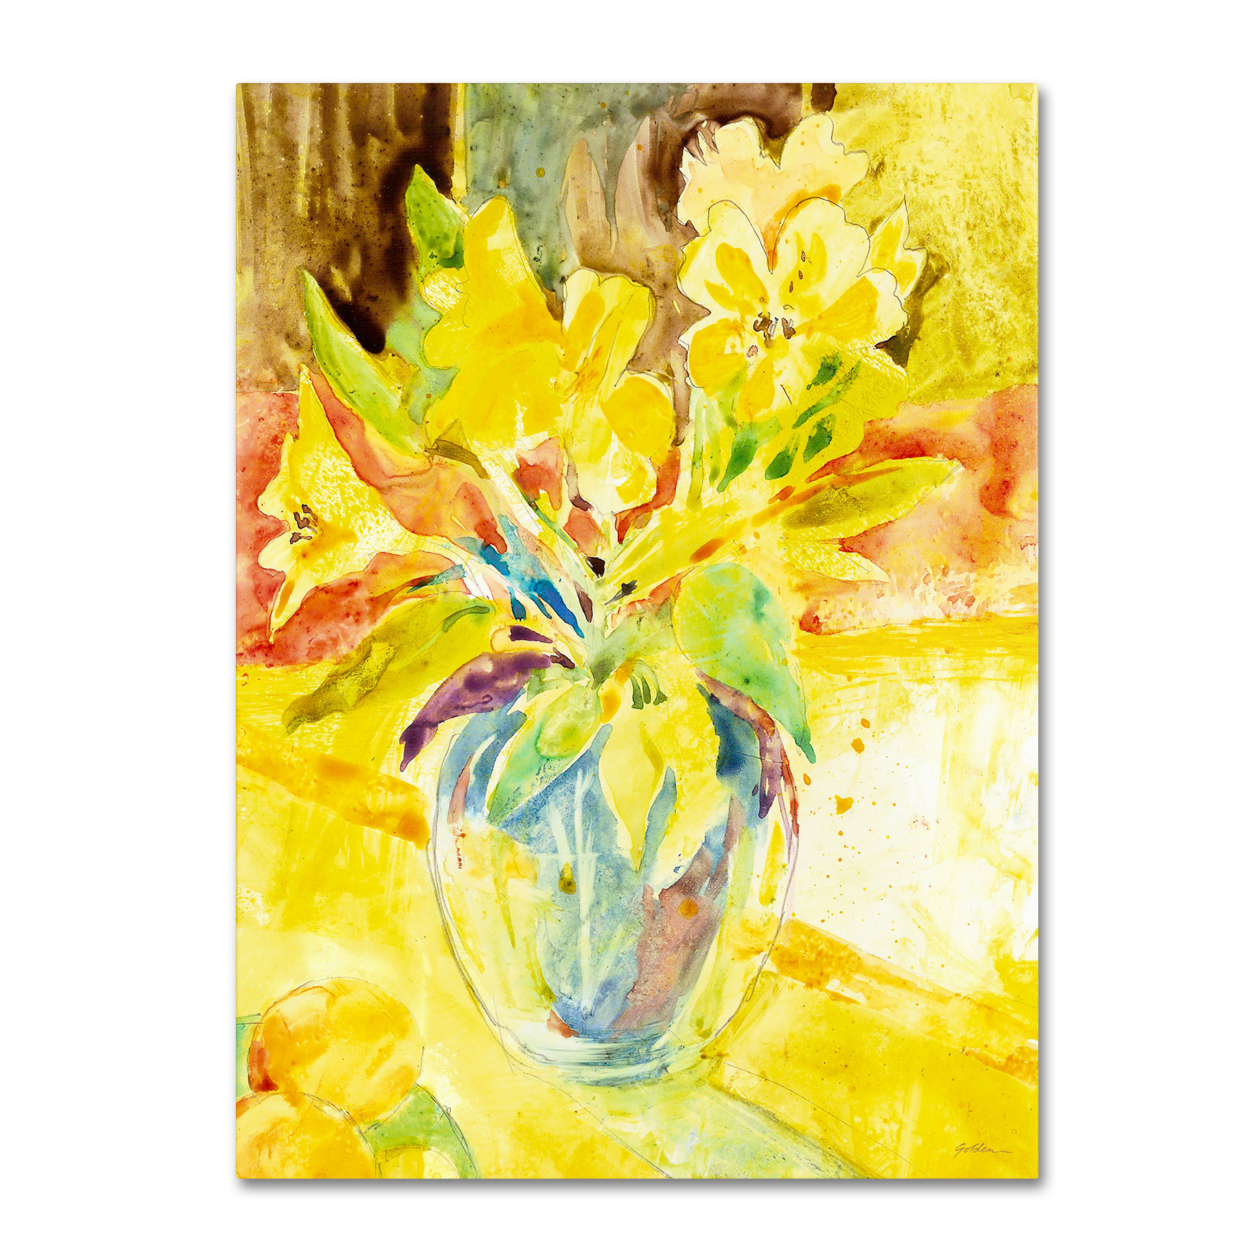 Sheila Golden 'Vase With Yellow Flowers' Canvas Wall Art 35 X 47 Inches